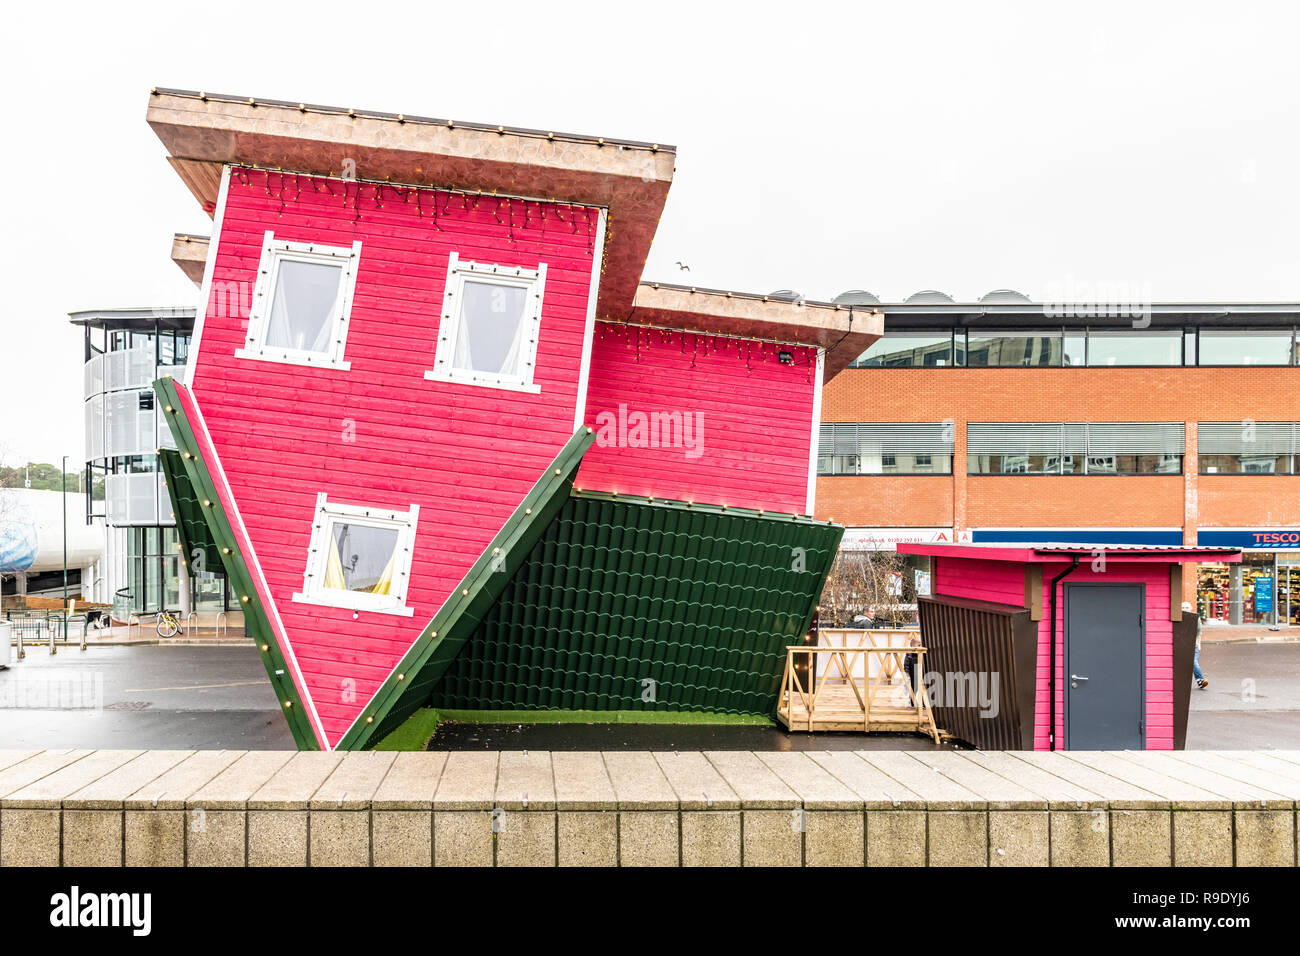 Bournemouth, UK. 23rd Dec, 2018. The upside-down house in The Triangle area of Bournemouth attracts shoppers just before Christmas. Visitors can enter the attraction for a new perspective on the world. Credit: Thomas Faull/Alamy Live News Stock Photo